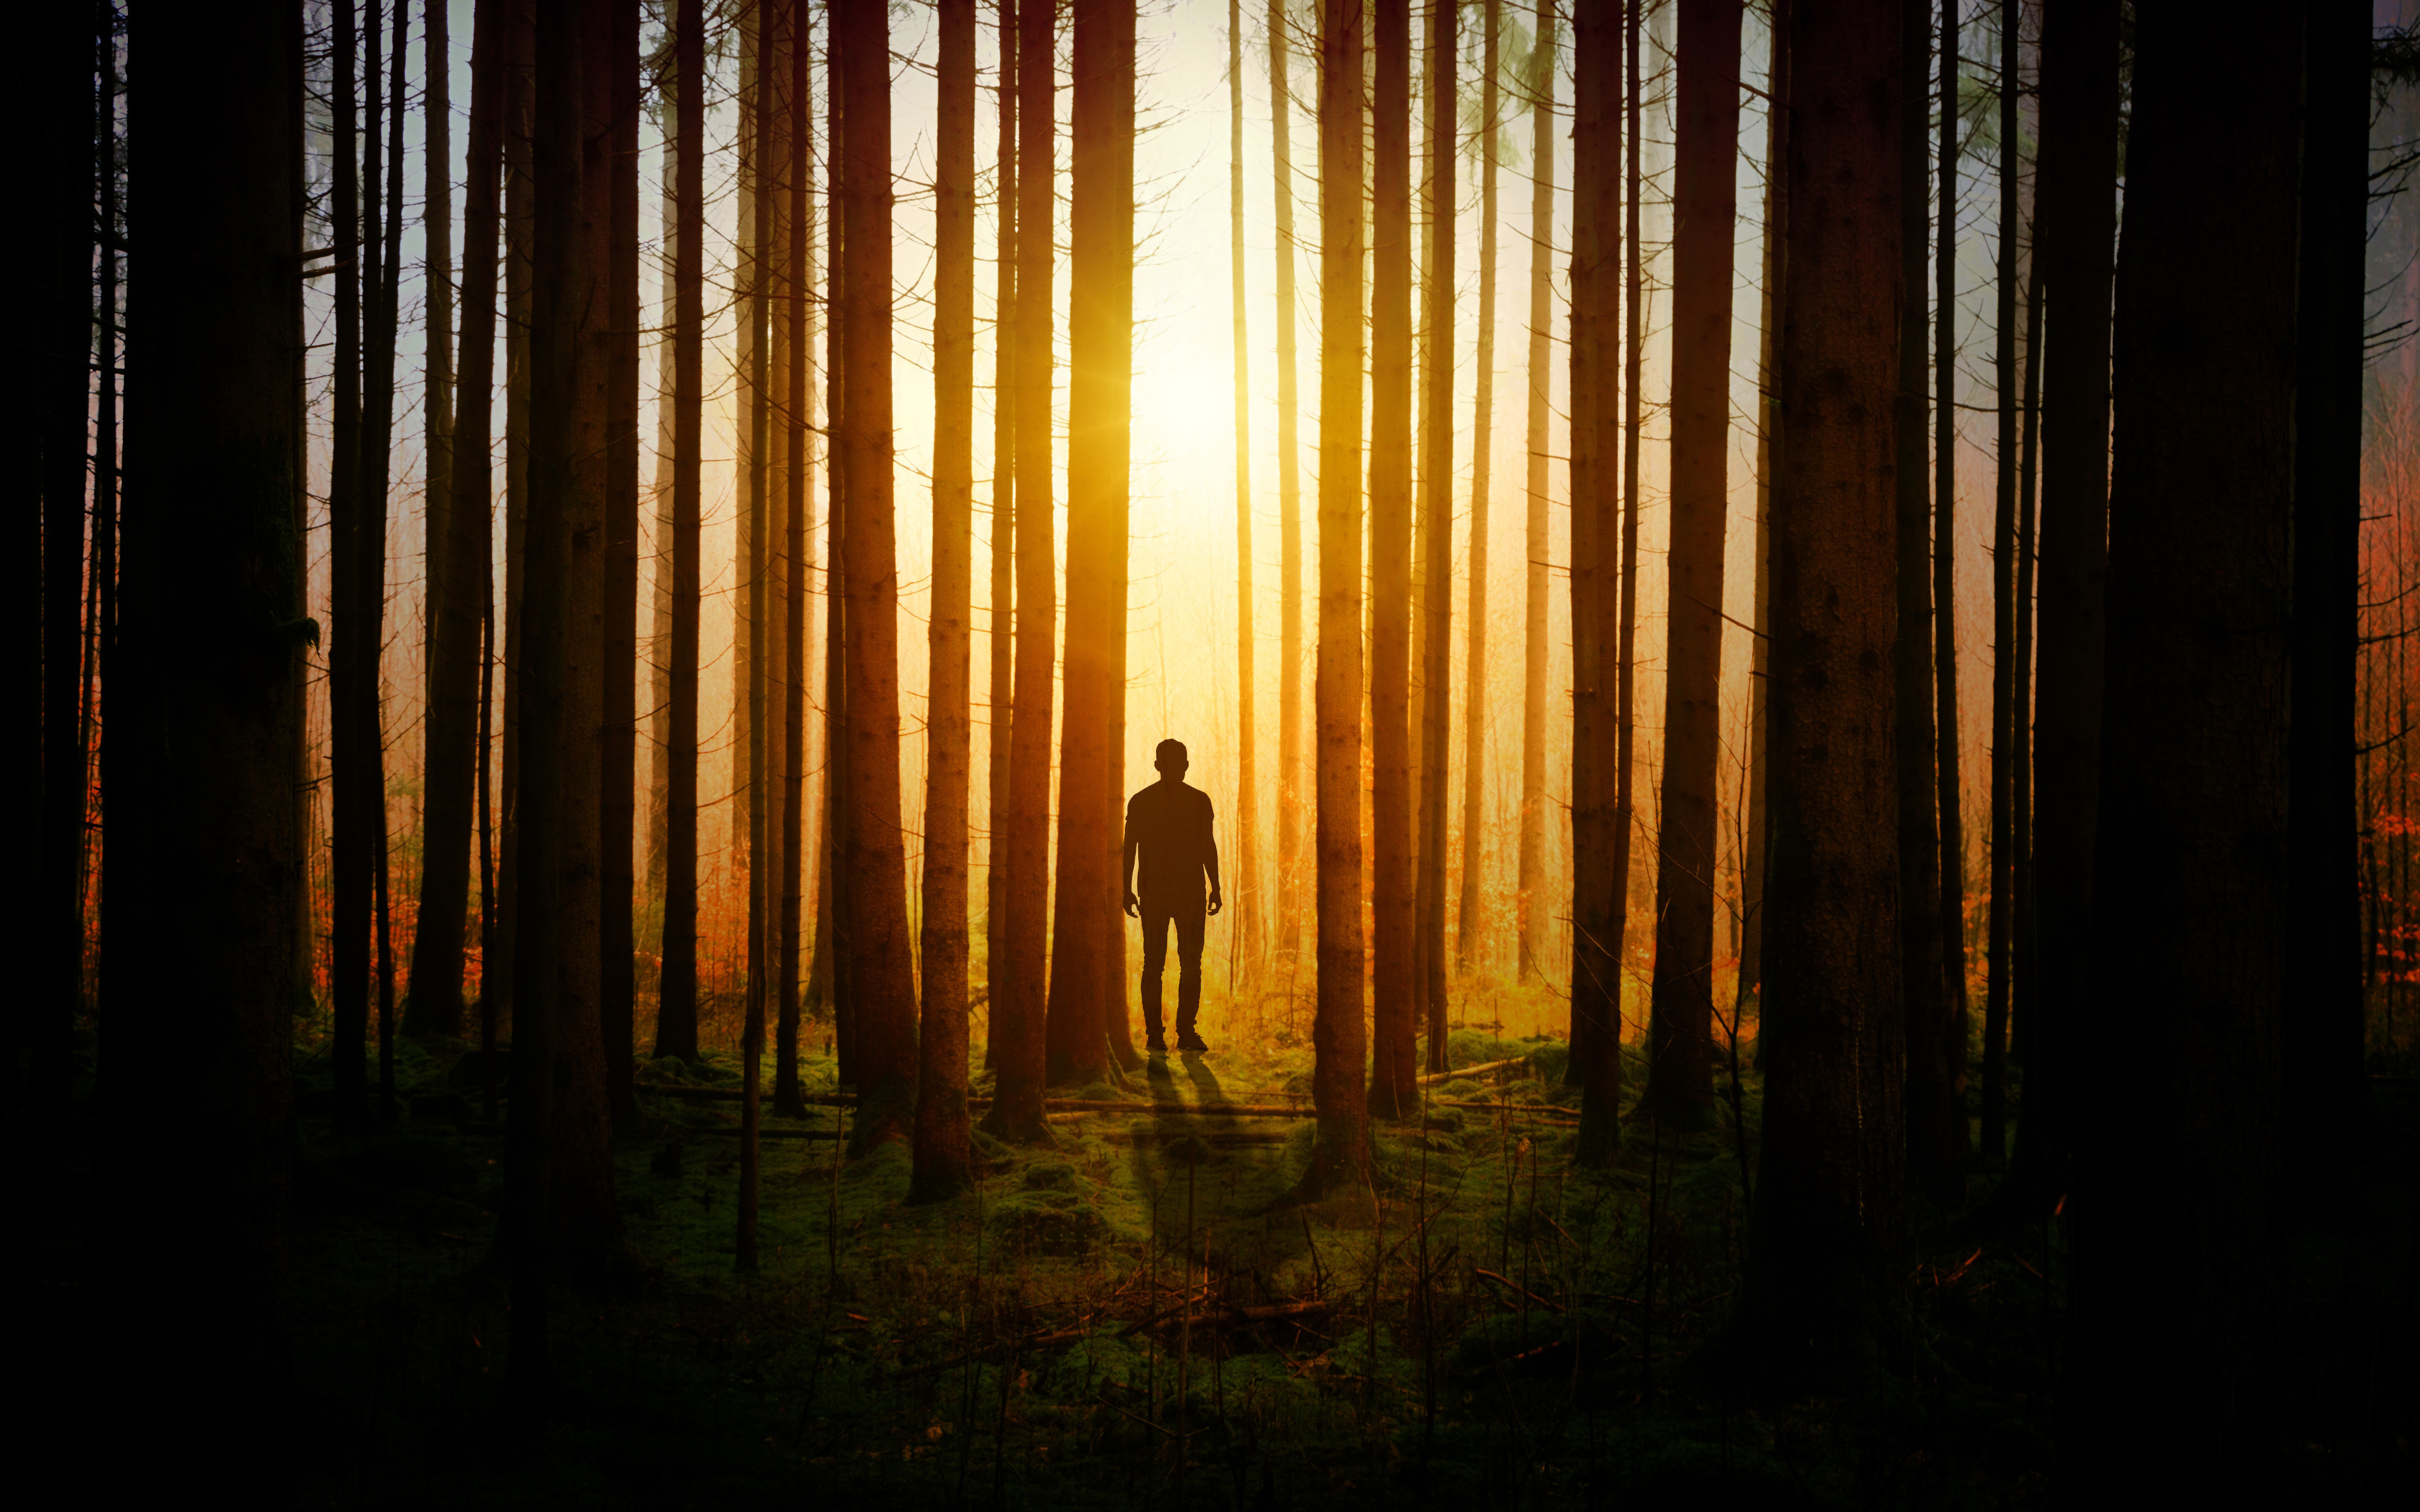 Alone In Forest Sunset 4k - Forest Sun And Person - HD Wallpaper 